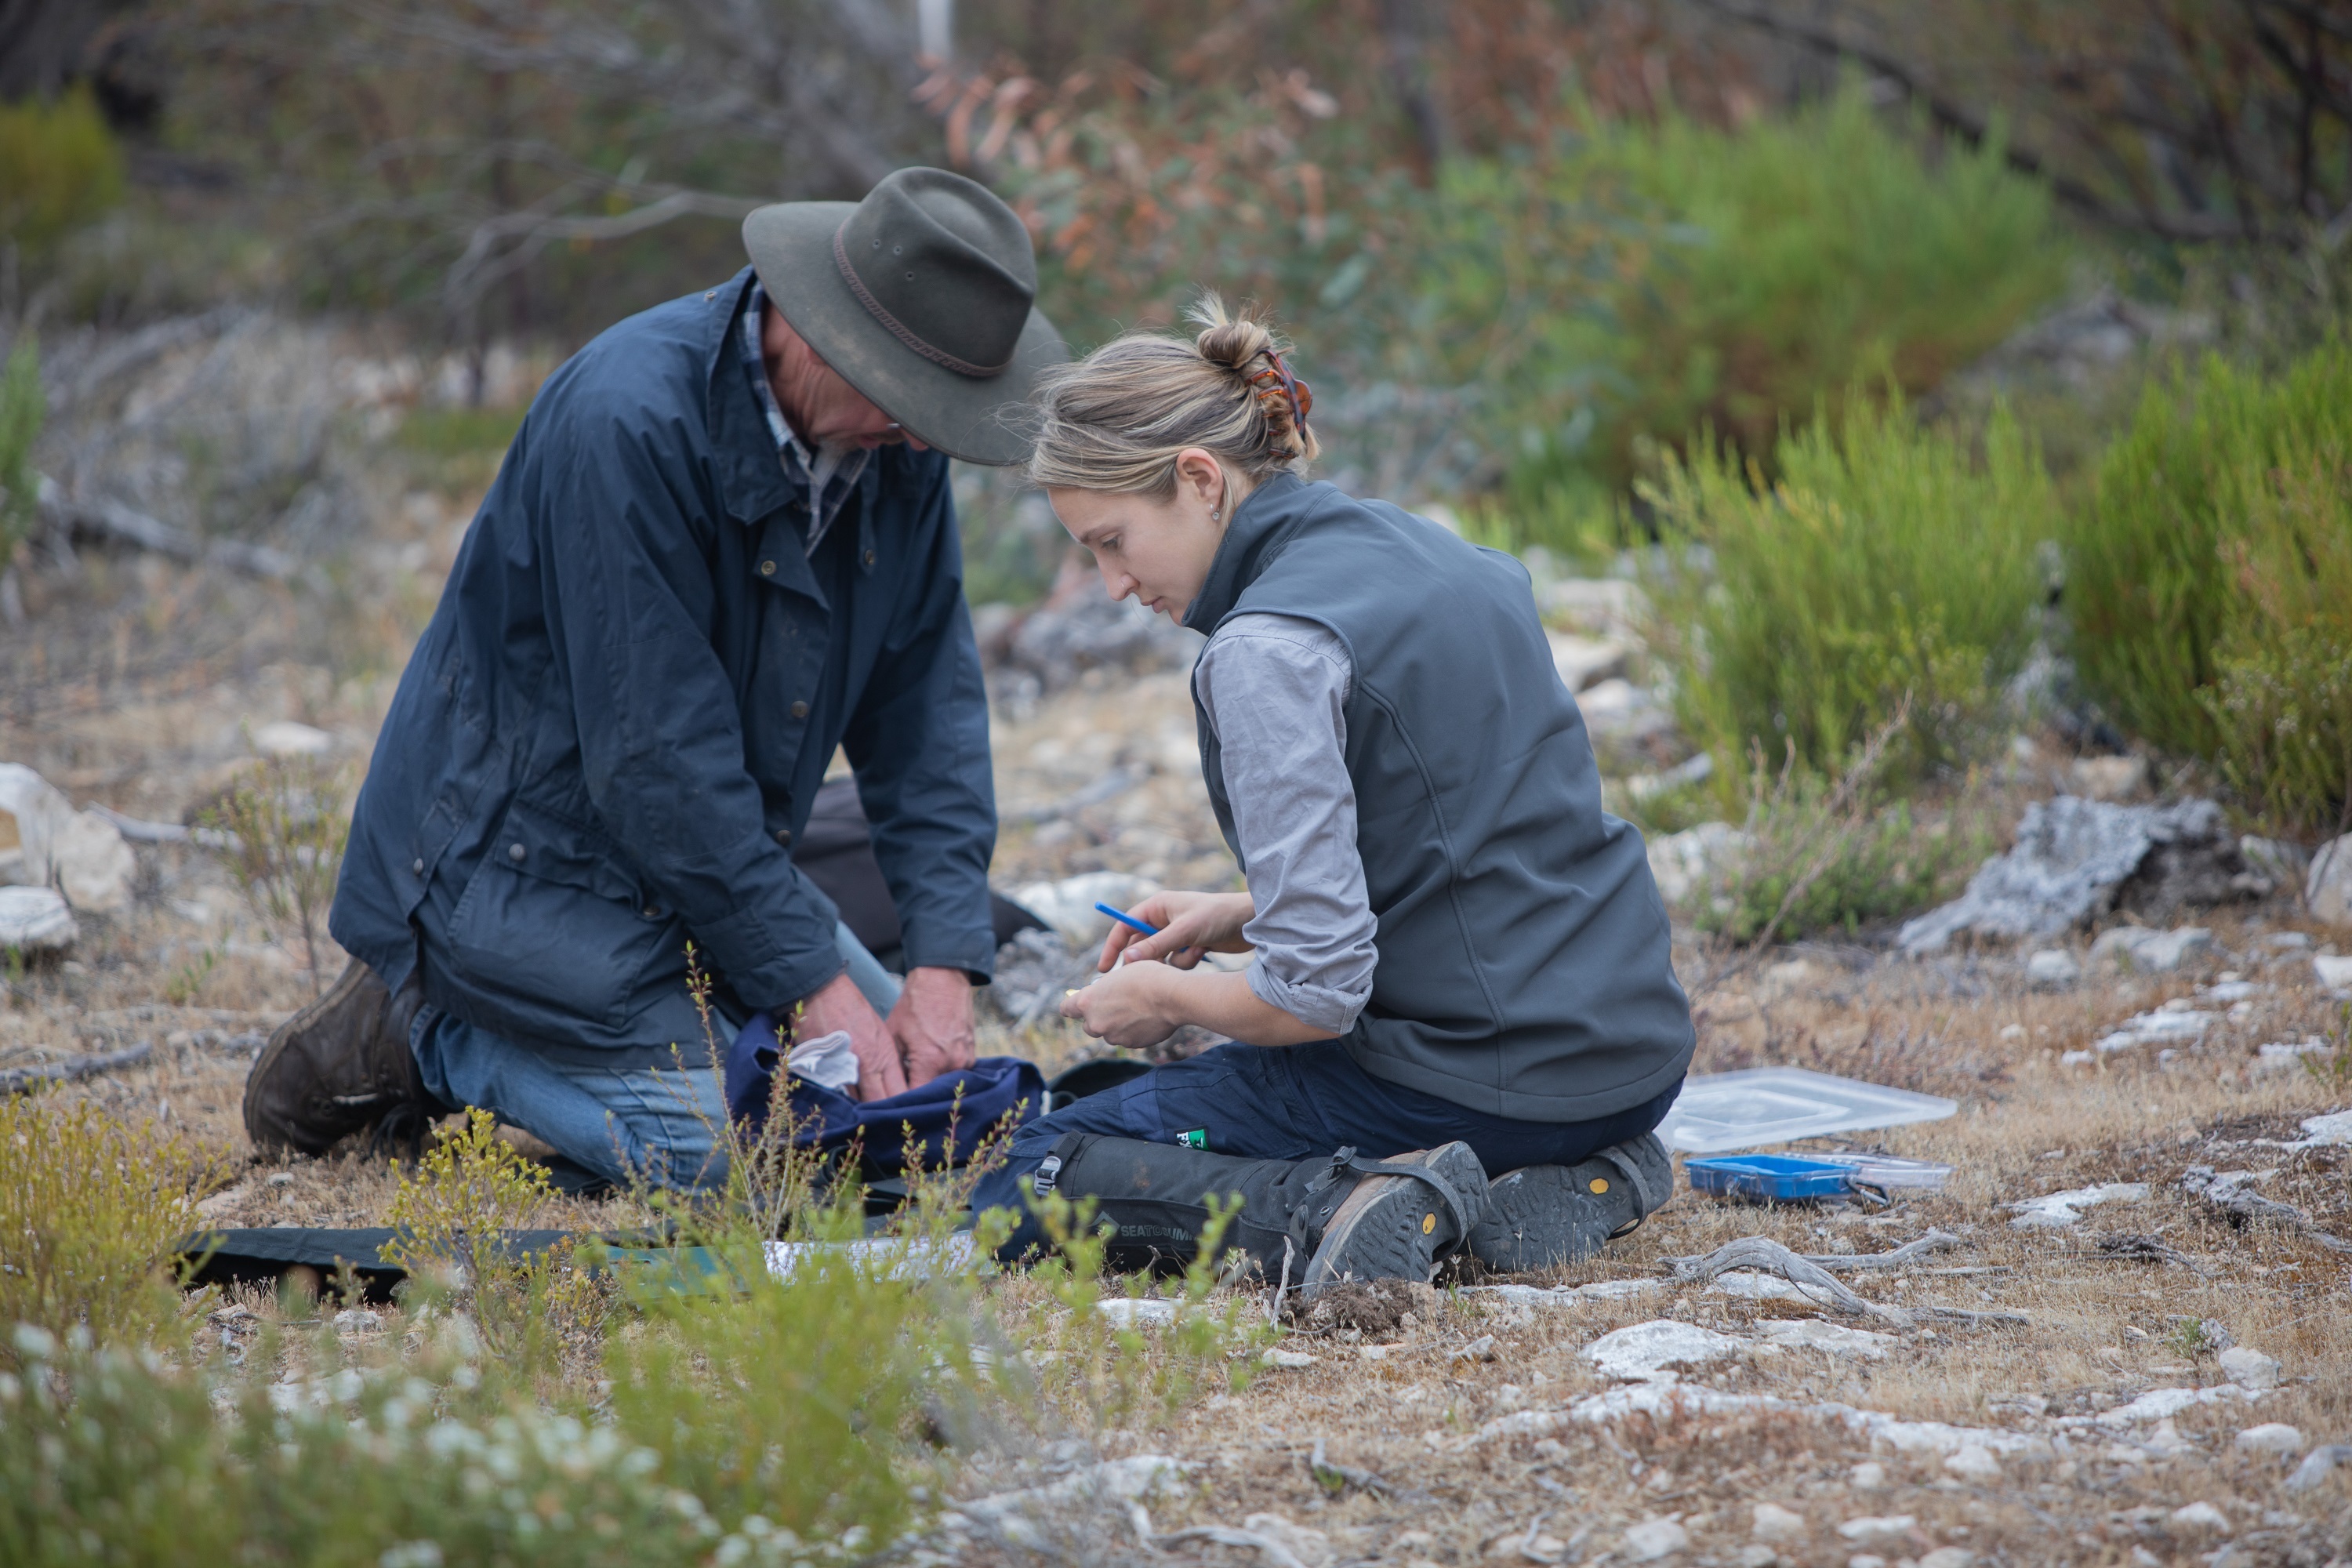 University of Adelaide Associate Professor Dr David Taggart and Northern and Yorke Landscape Board Project Ecologist Claire Hartvigsen-Power measure and weigh a yalgi. Credit: NYLB / Daniel Clarke